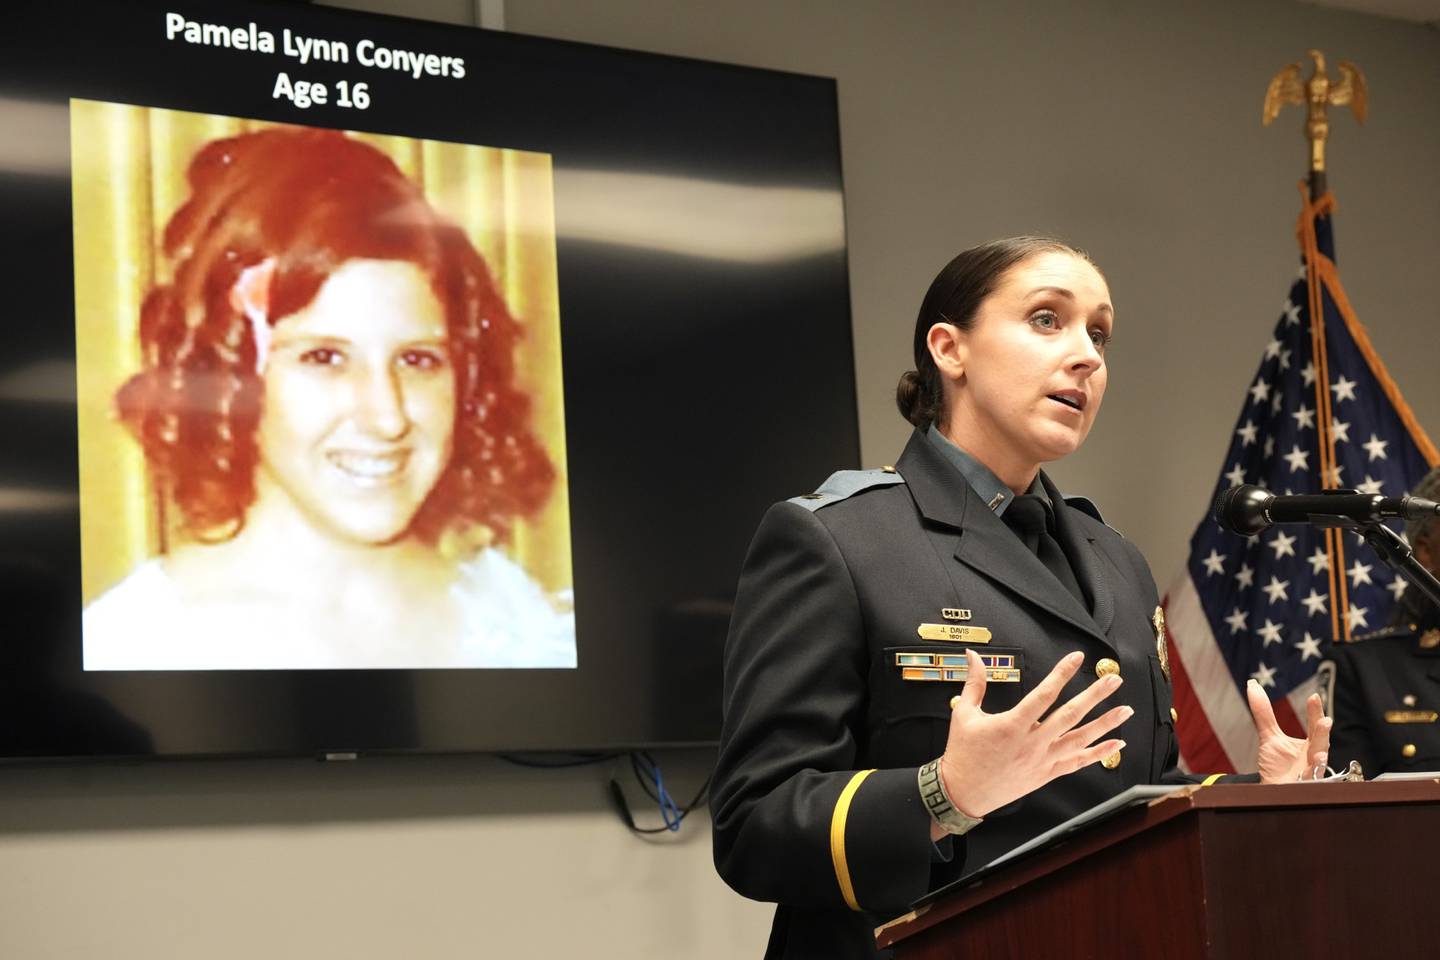 Lieutenant Jackie Davis speaks on the 1970 murder of 16-year-old Pamela Lynn Conyers during a press conference at the Anne Arundel Police Headquarters on March 10, 2023.